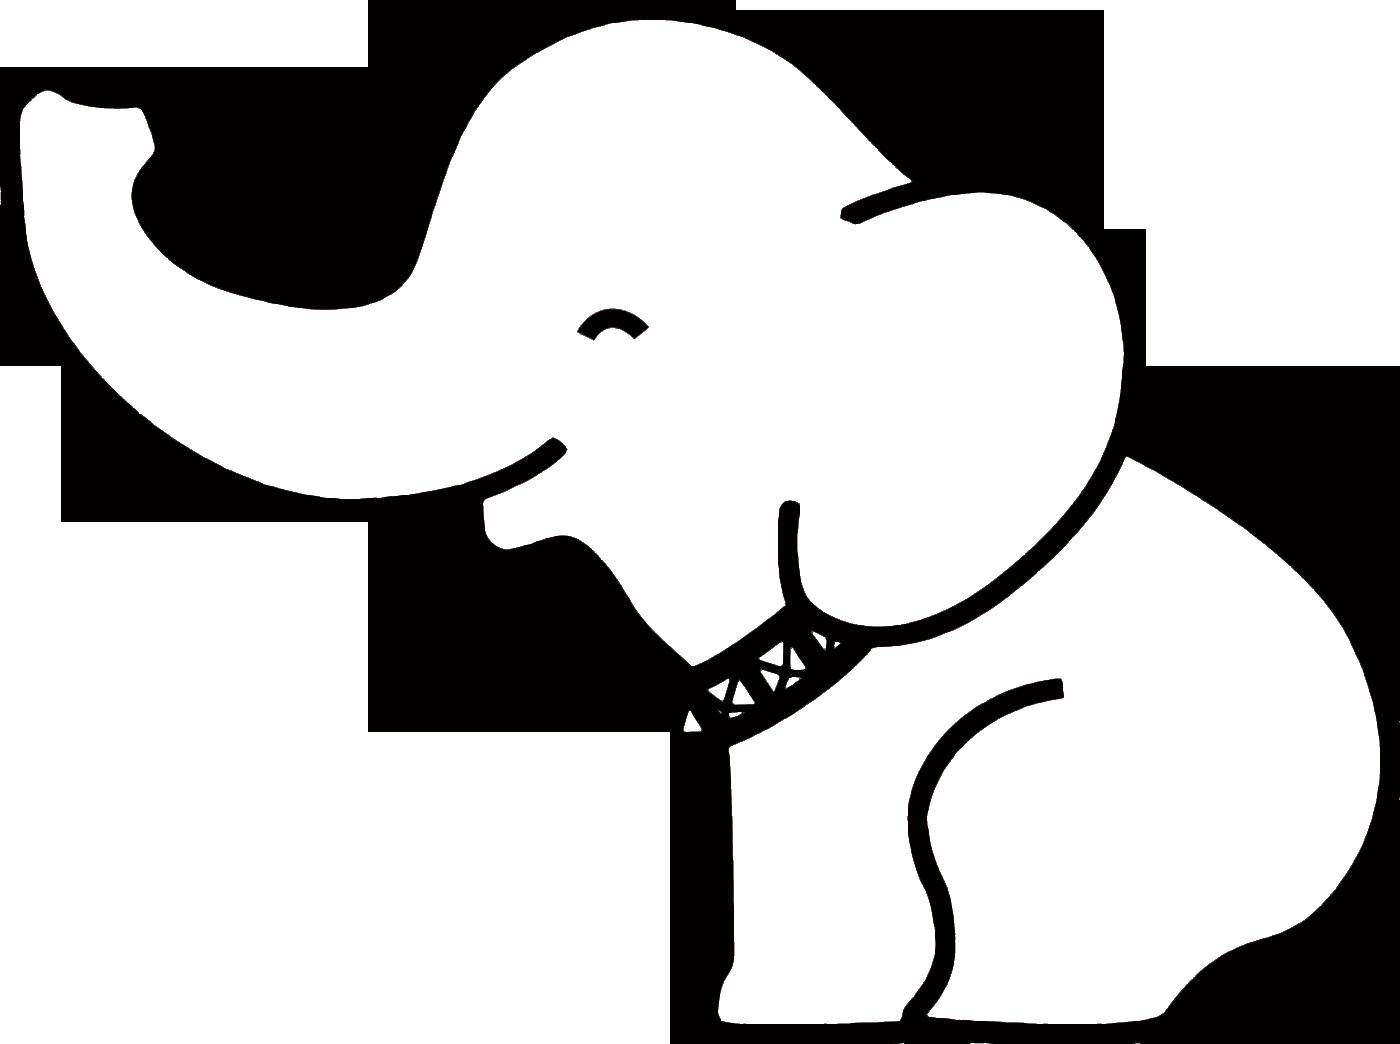 Coloring The elephant in the collar. Category the contours of the elephant to cut. Tags:  elephant.